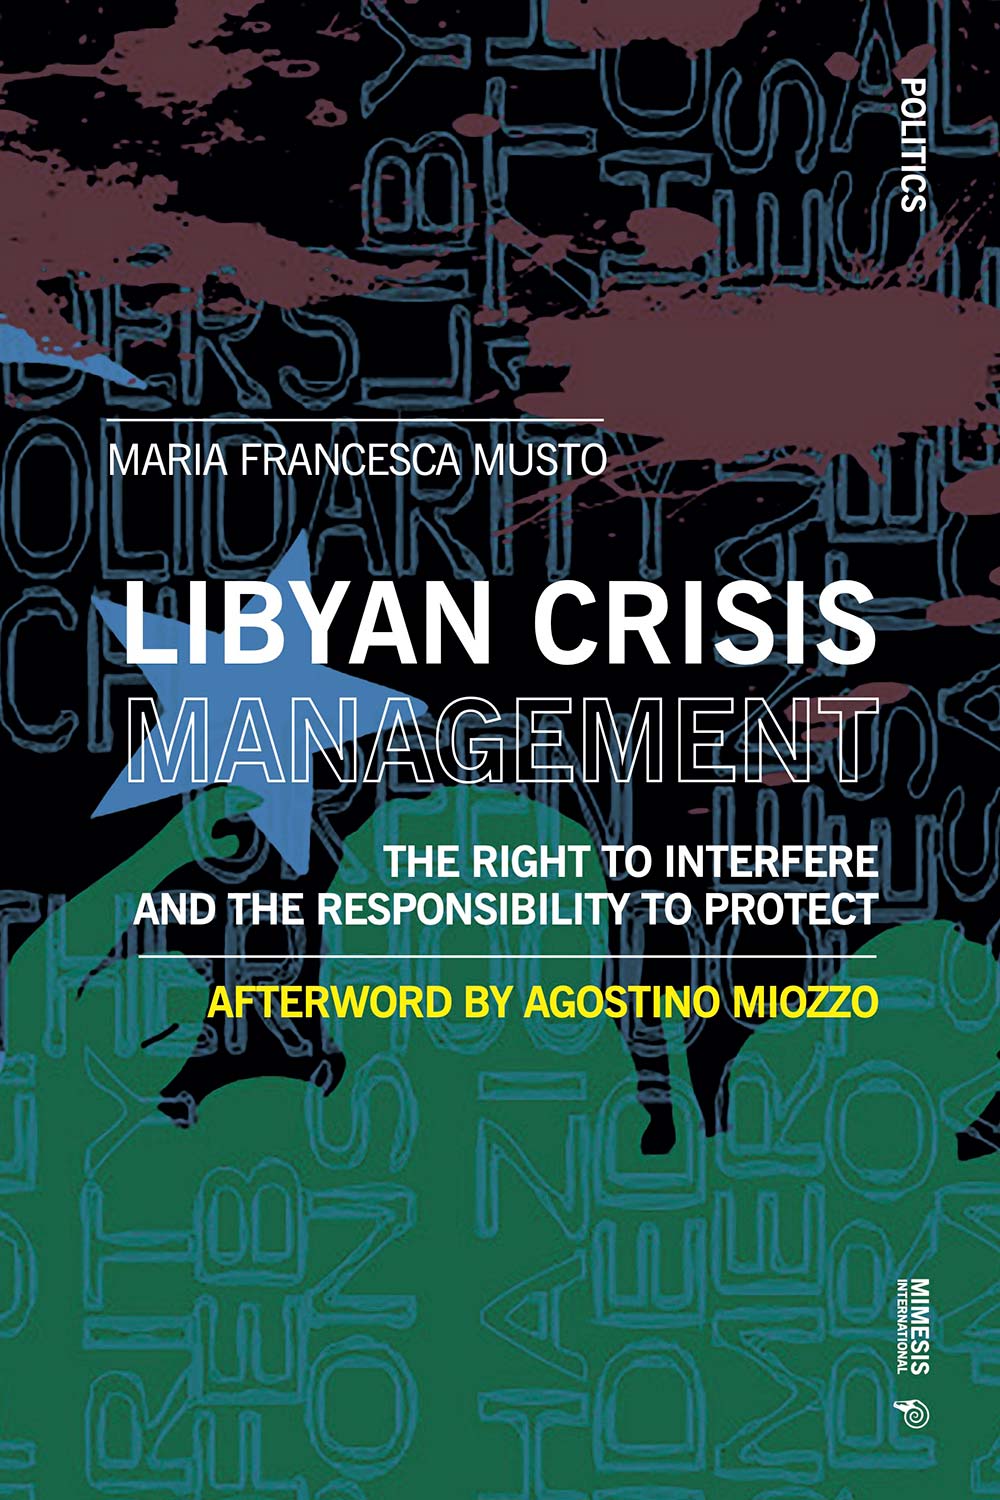 Libyan Crisis Management. The Right to Interfere No and the Responsibility to Protect